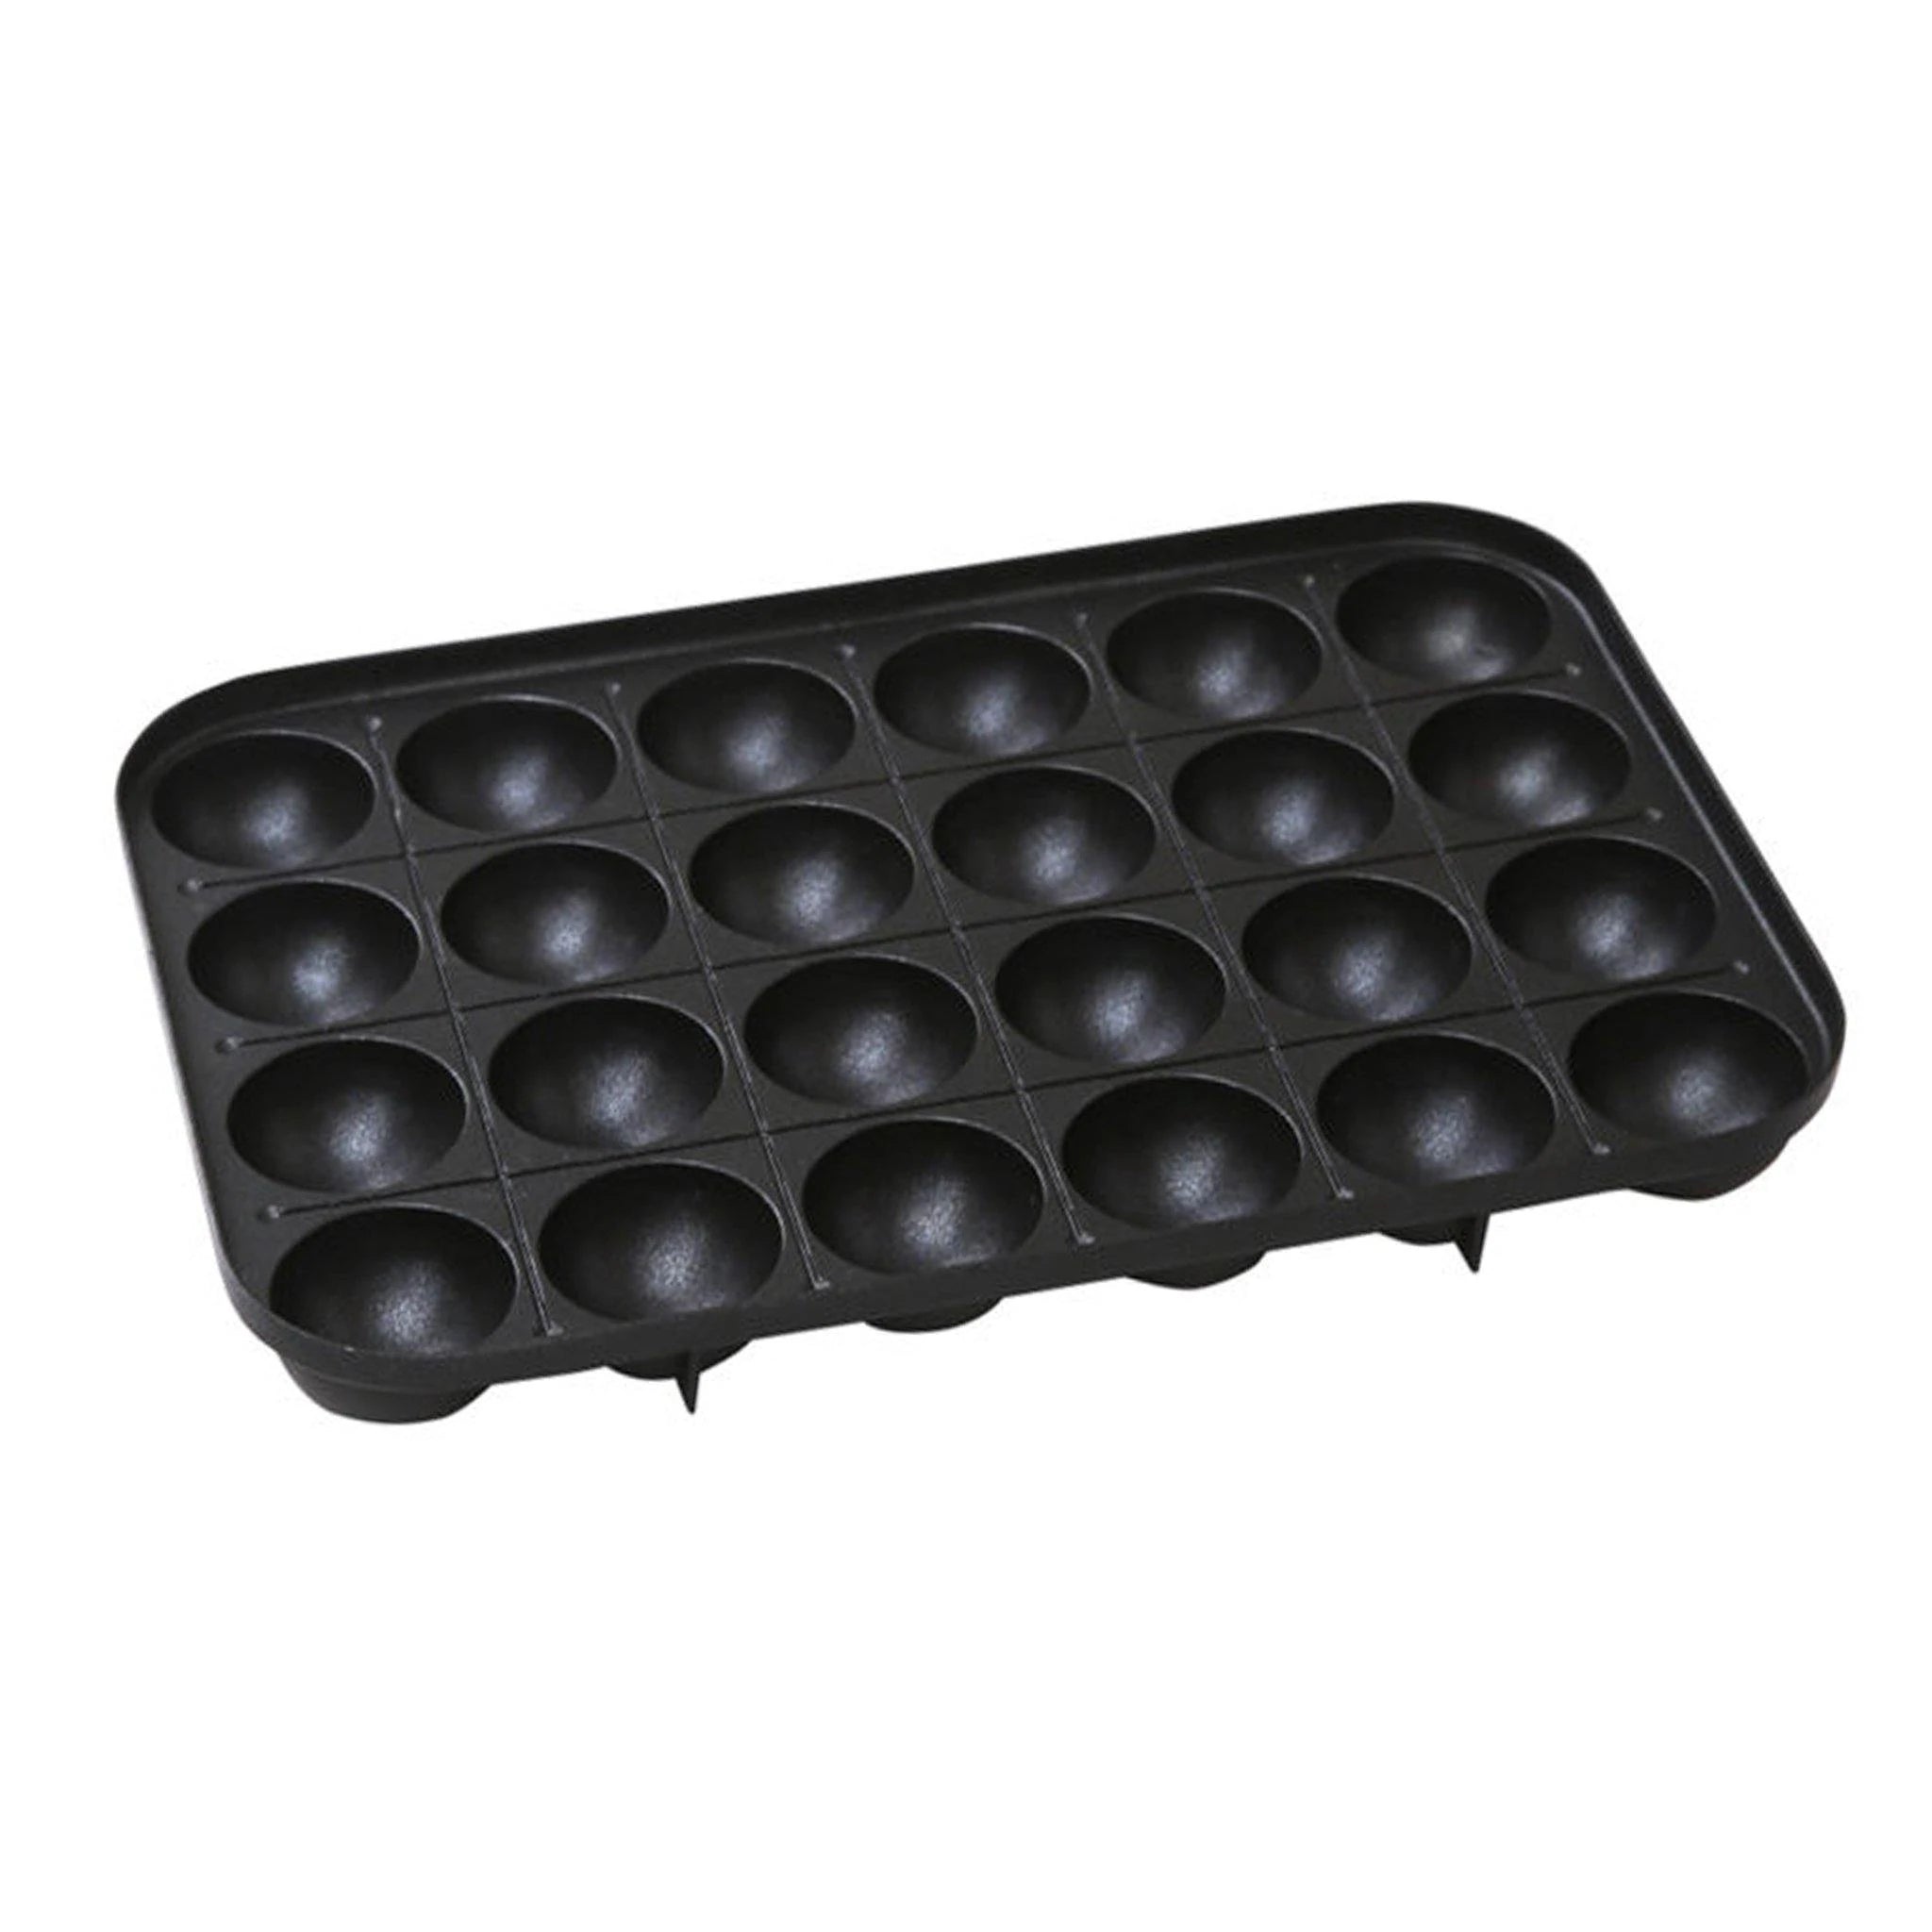 BRUNO Takoyaki Plate (for Compact Hot Plate / Replacement)